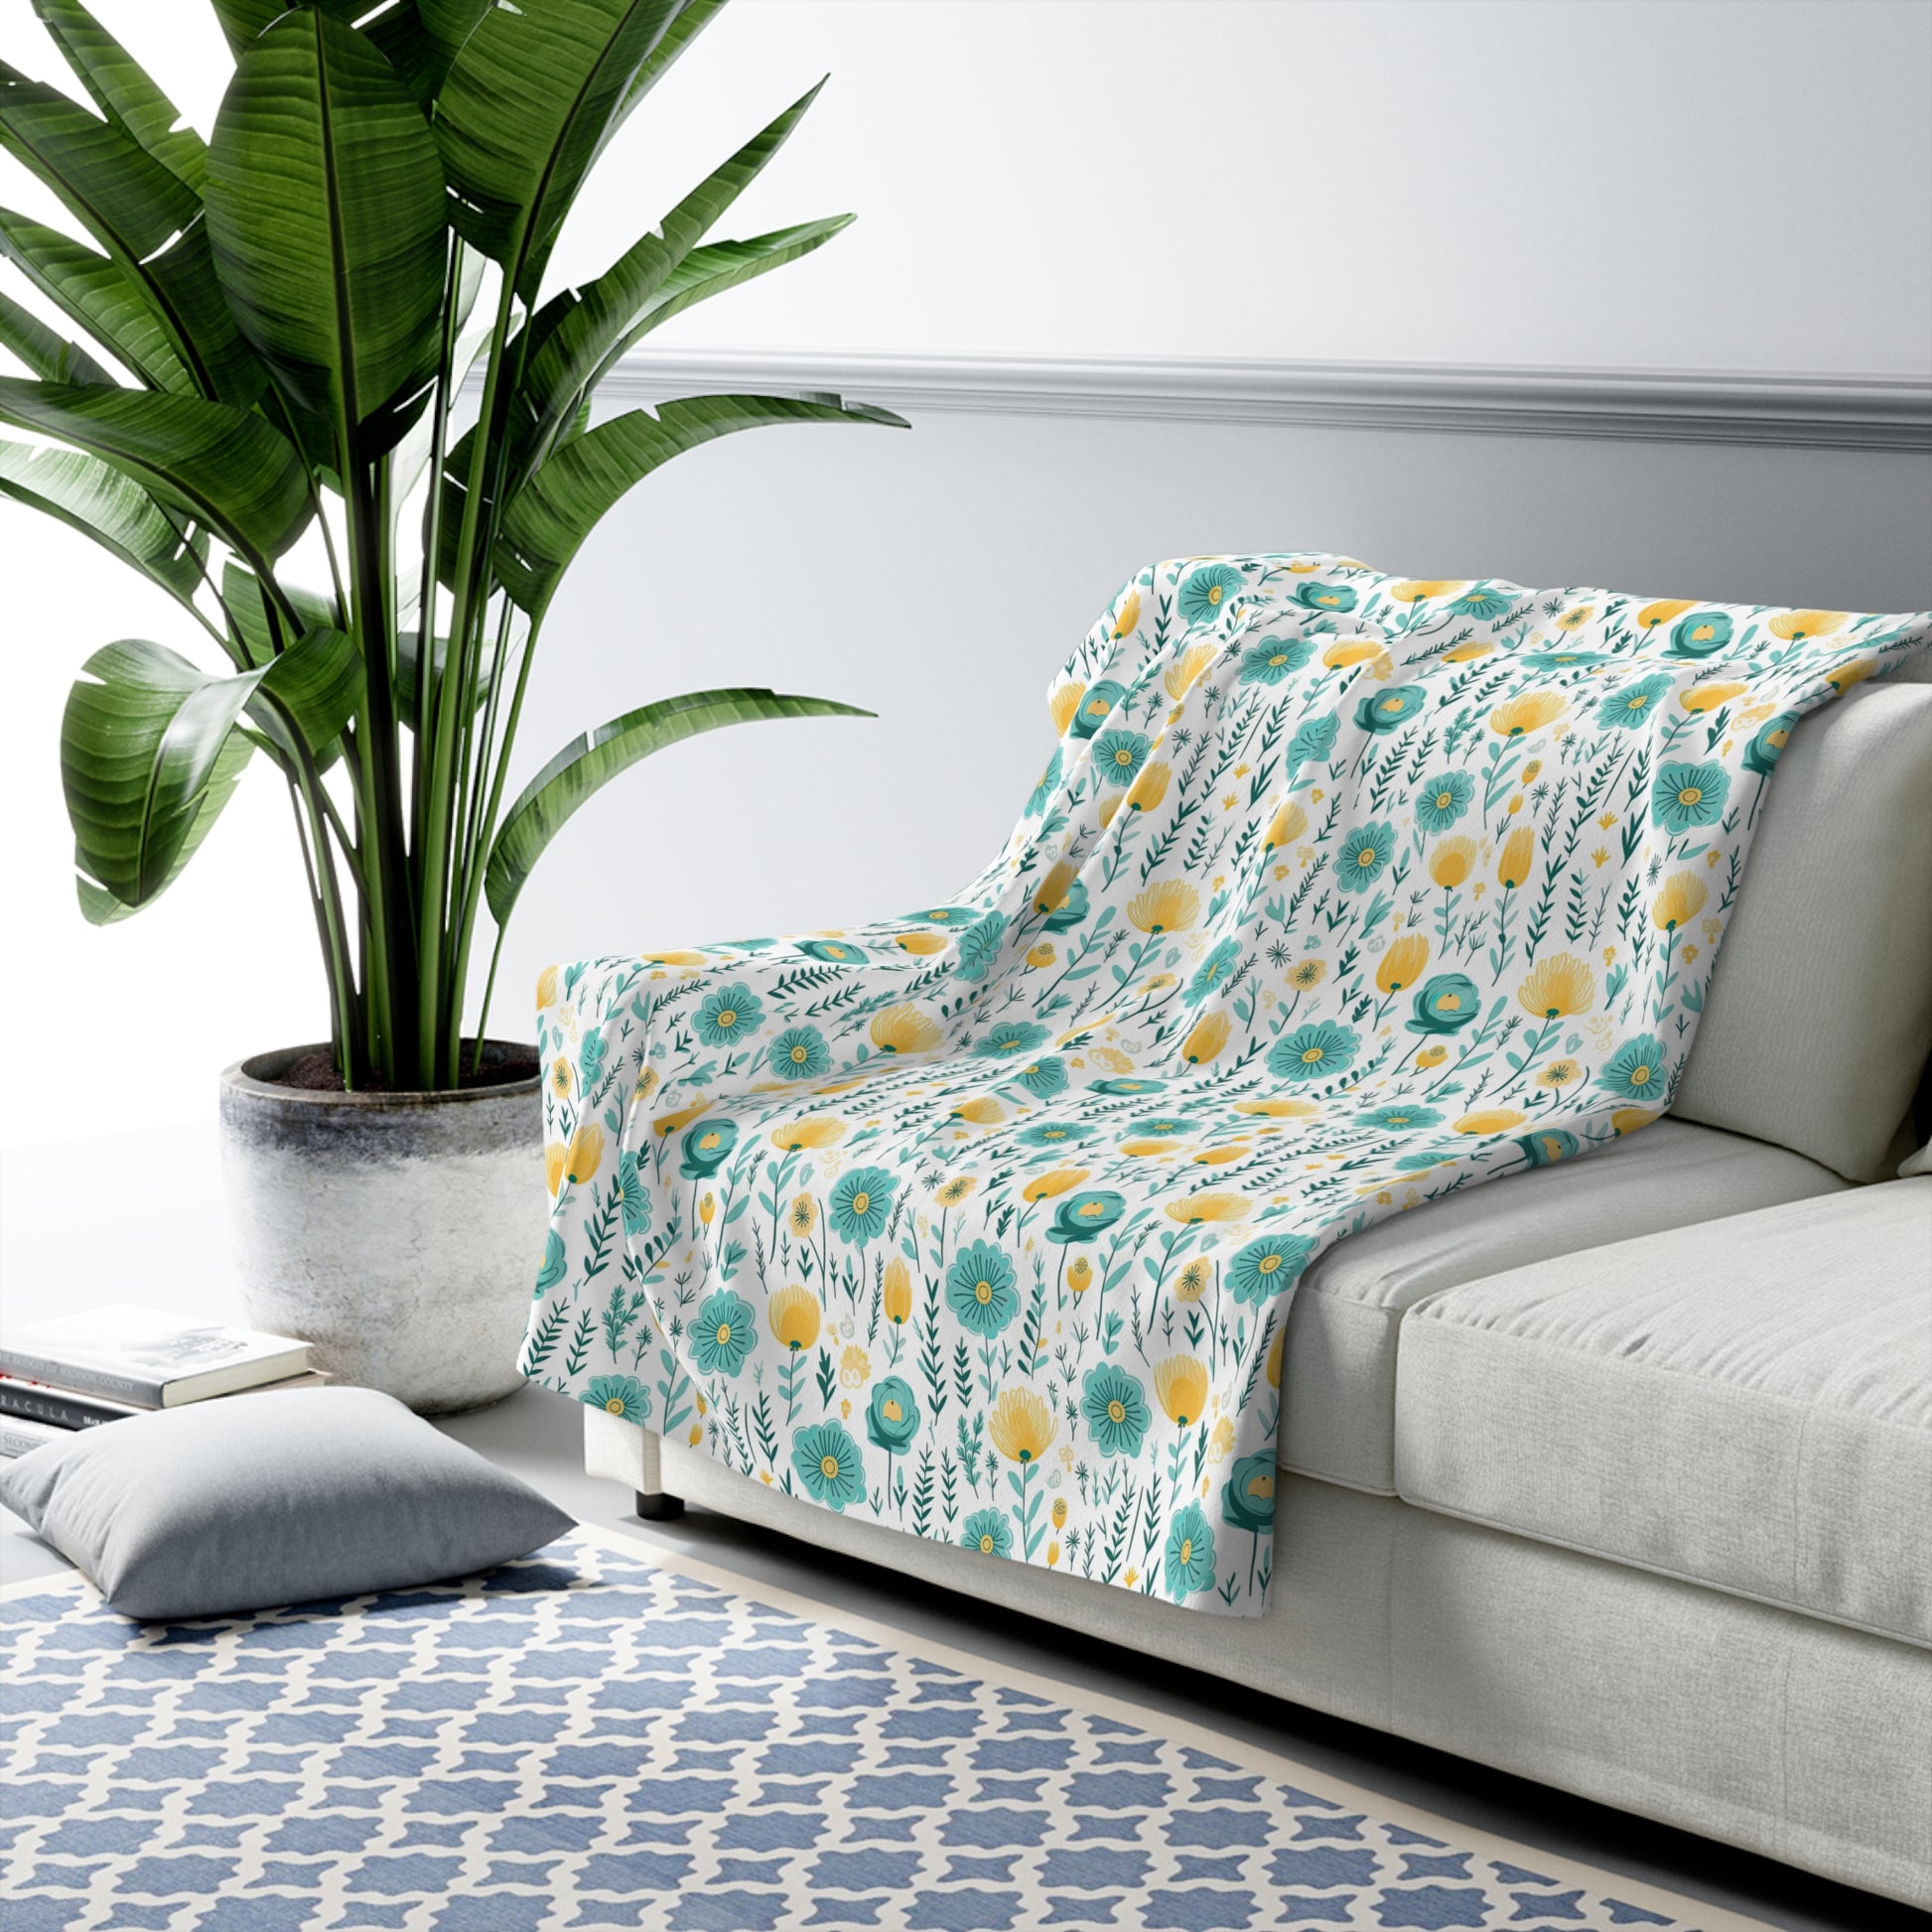 Floral Sherpa Fleece Blanket - Teal and Yellow Sherpa Blanket